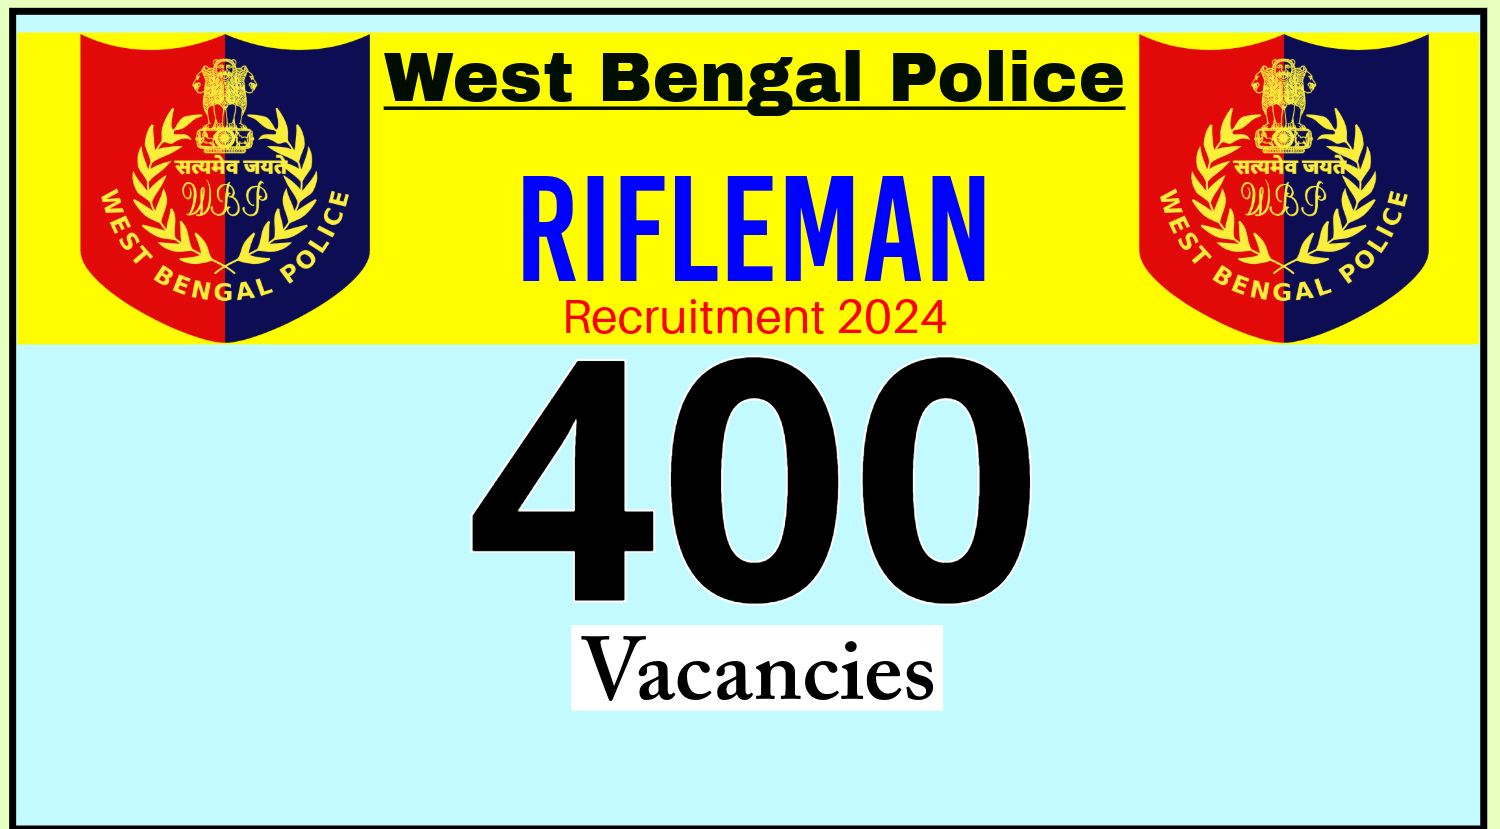 WB Police Rifleman Recruitment 2024 for 400 Vacancies Out